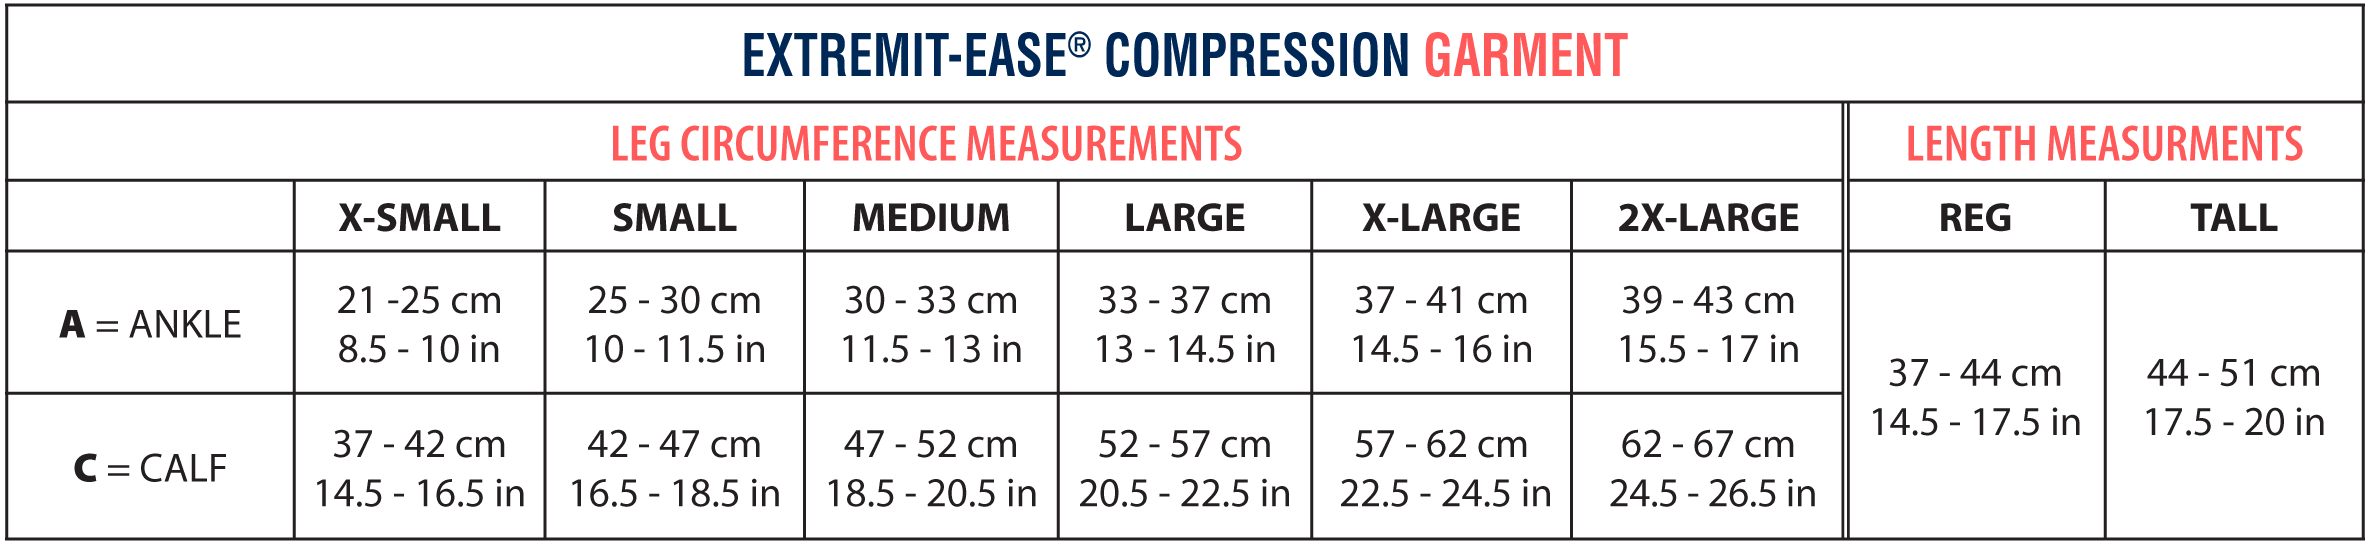 EXTREMIT-EASE Sizing Chart showing all measurements for extra small, small, medium, large, extra large, and extra-extra large sizes as well as tall and regular lengths